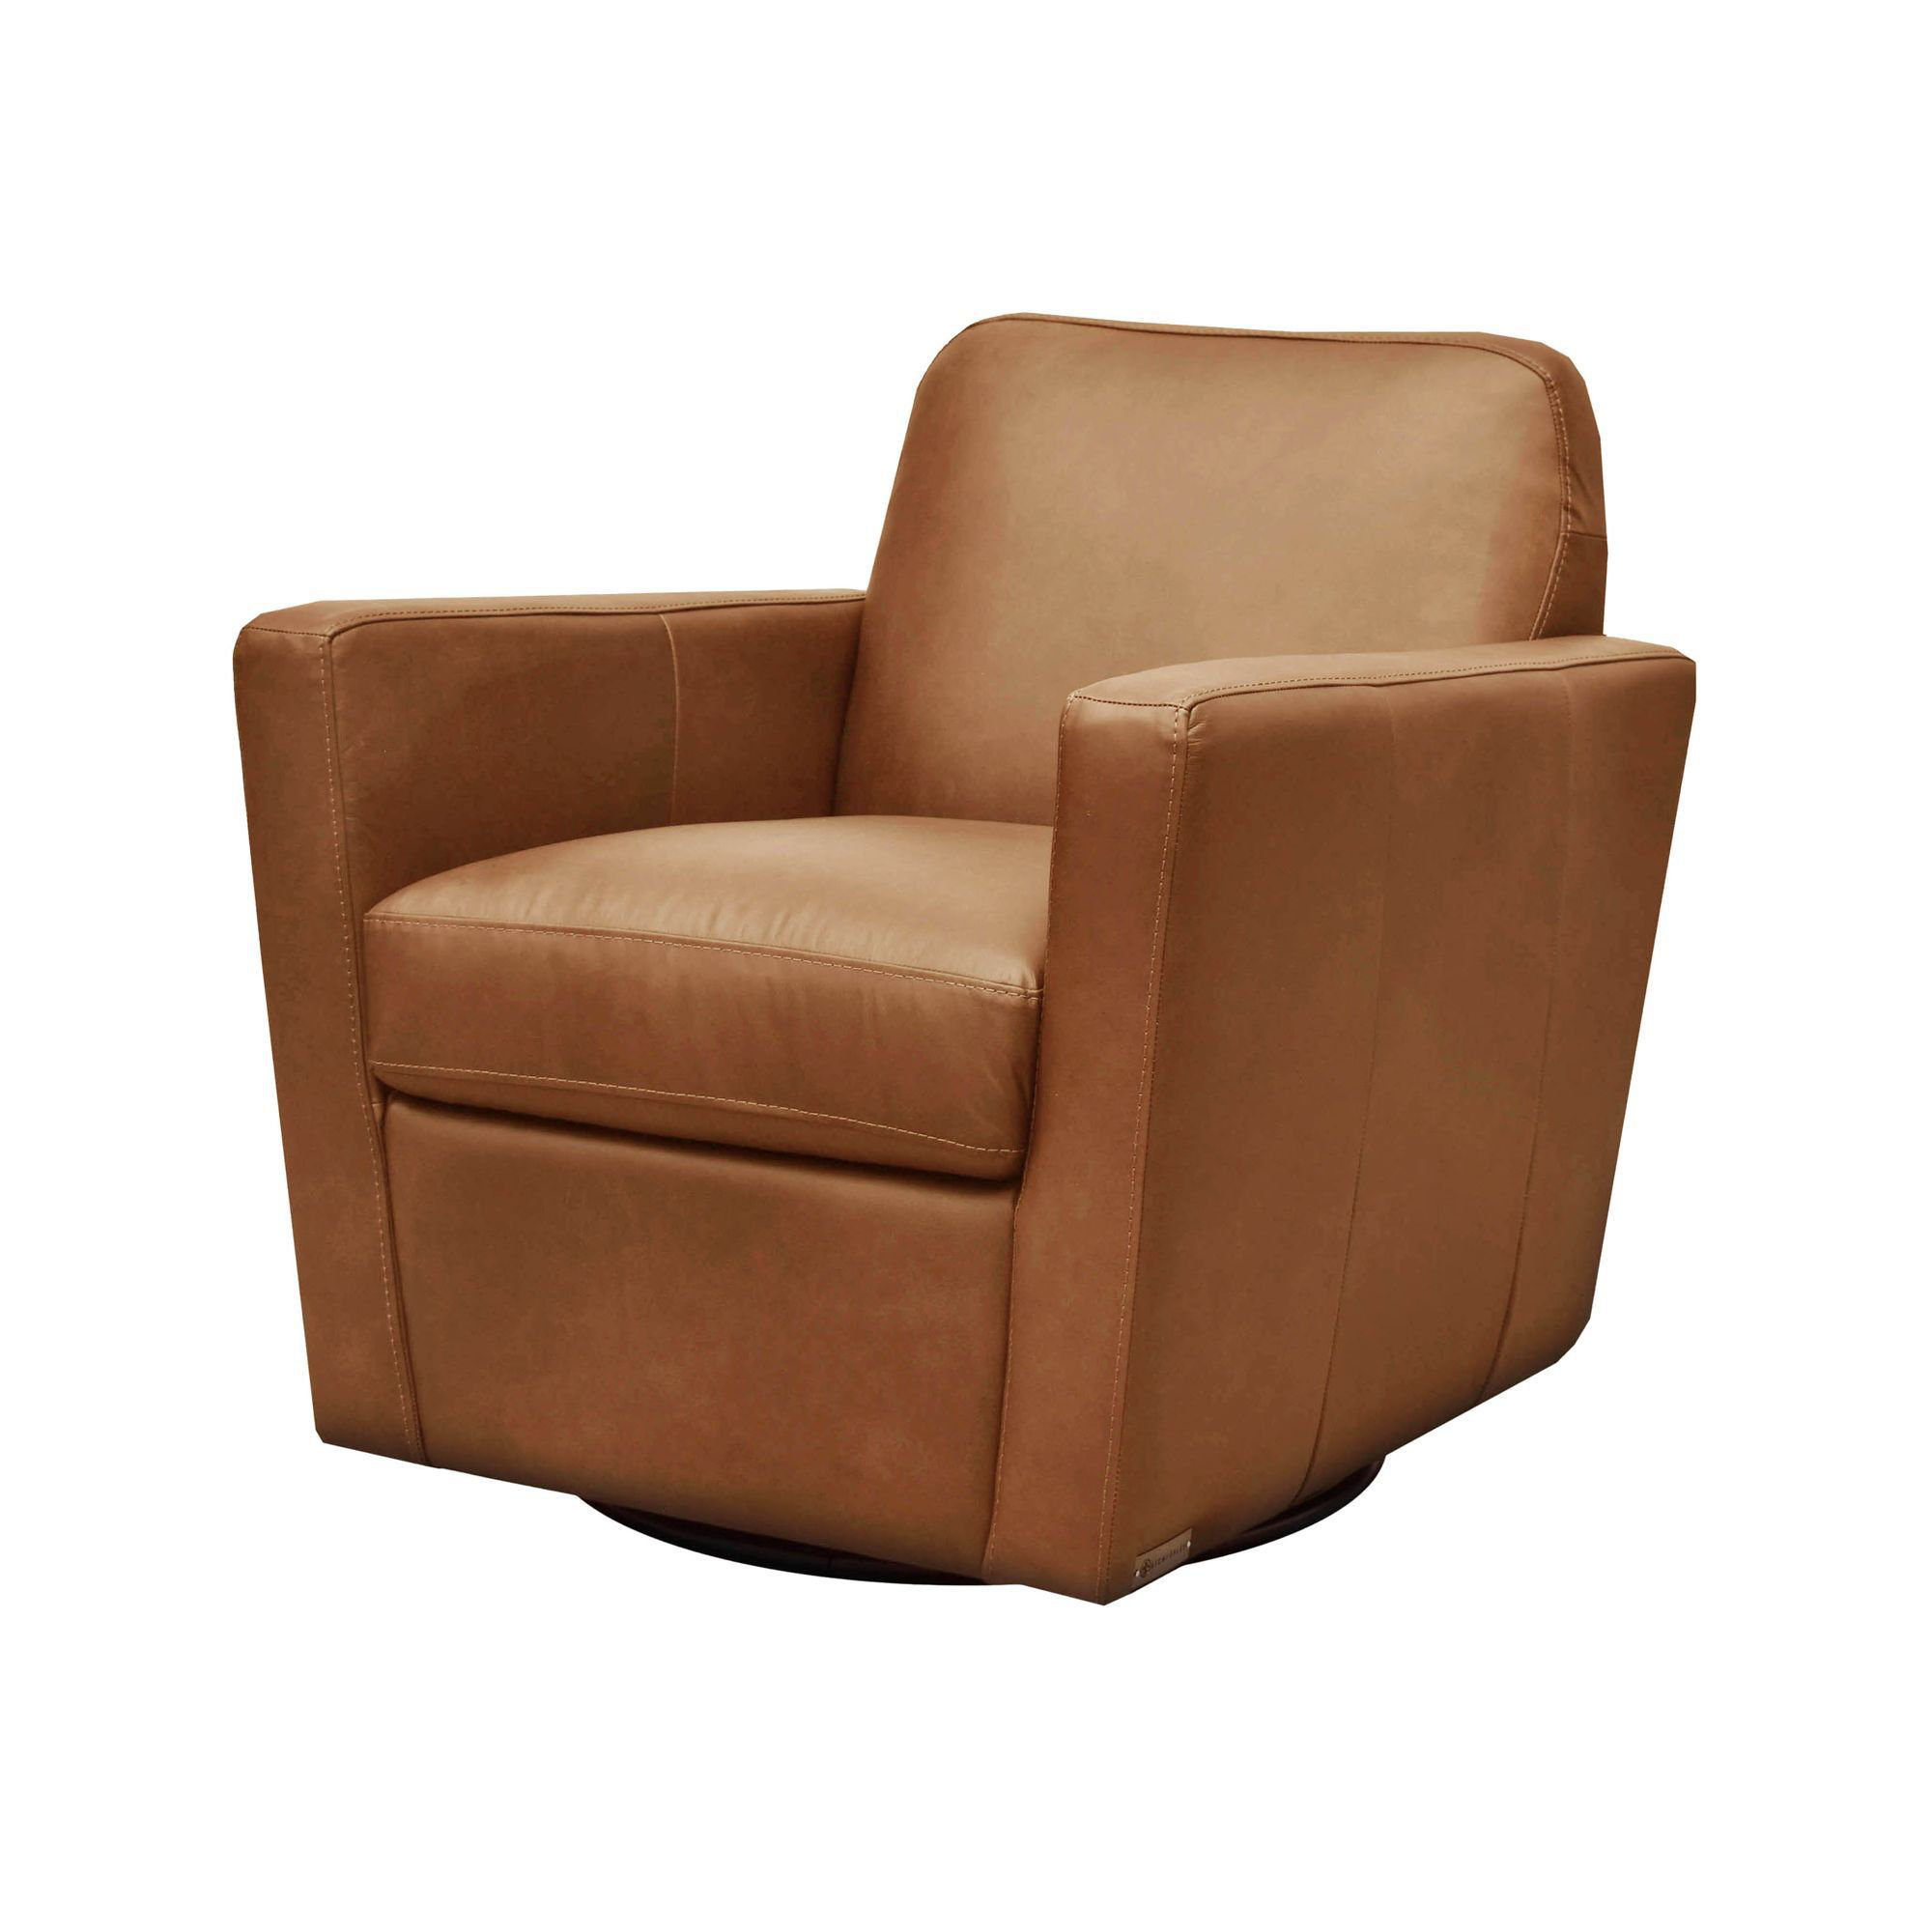 Monty Home | Wayfair Eclectic Chair Club Leather Swivel